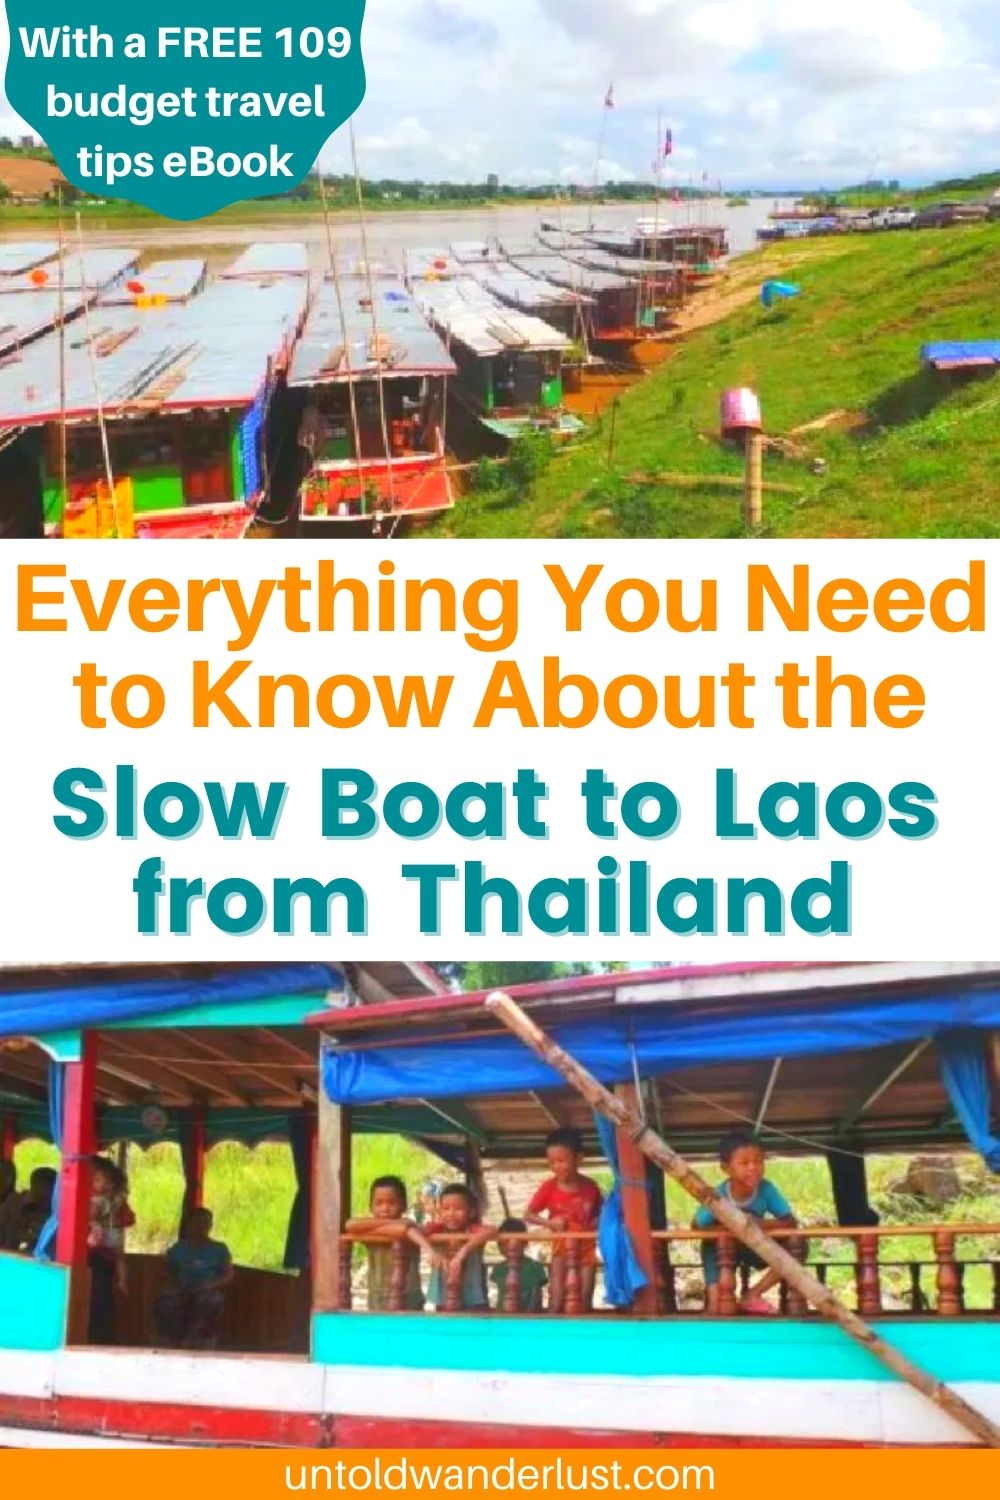 Everything You Need to Know About the Slow Boat to Laos from Thailand